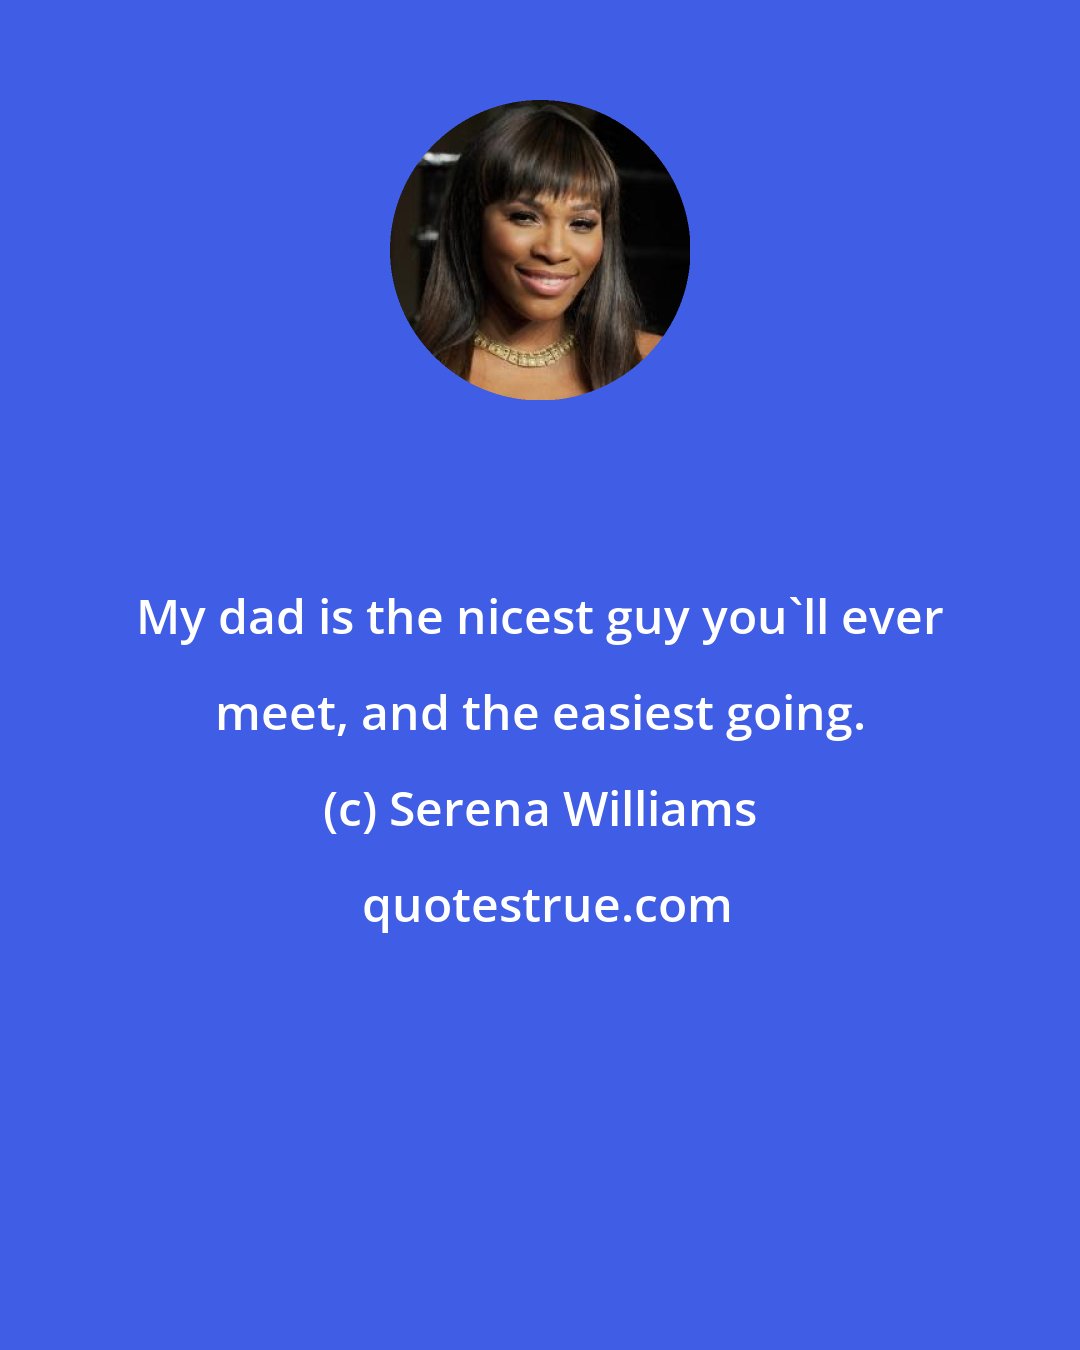 Serena Williams: My dad is the nicest guy you'll ever meet, and the easiest going.